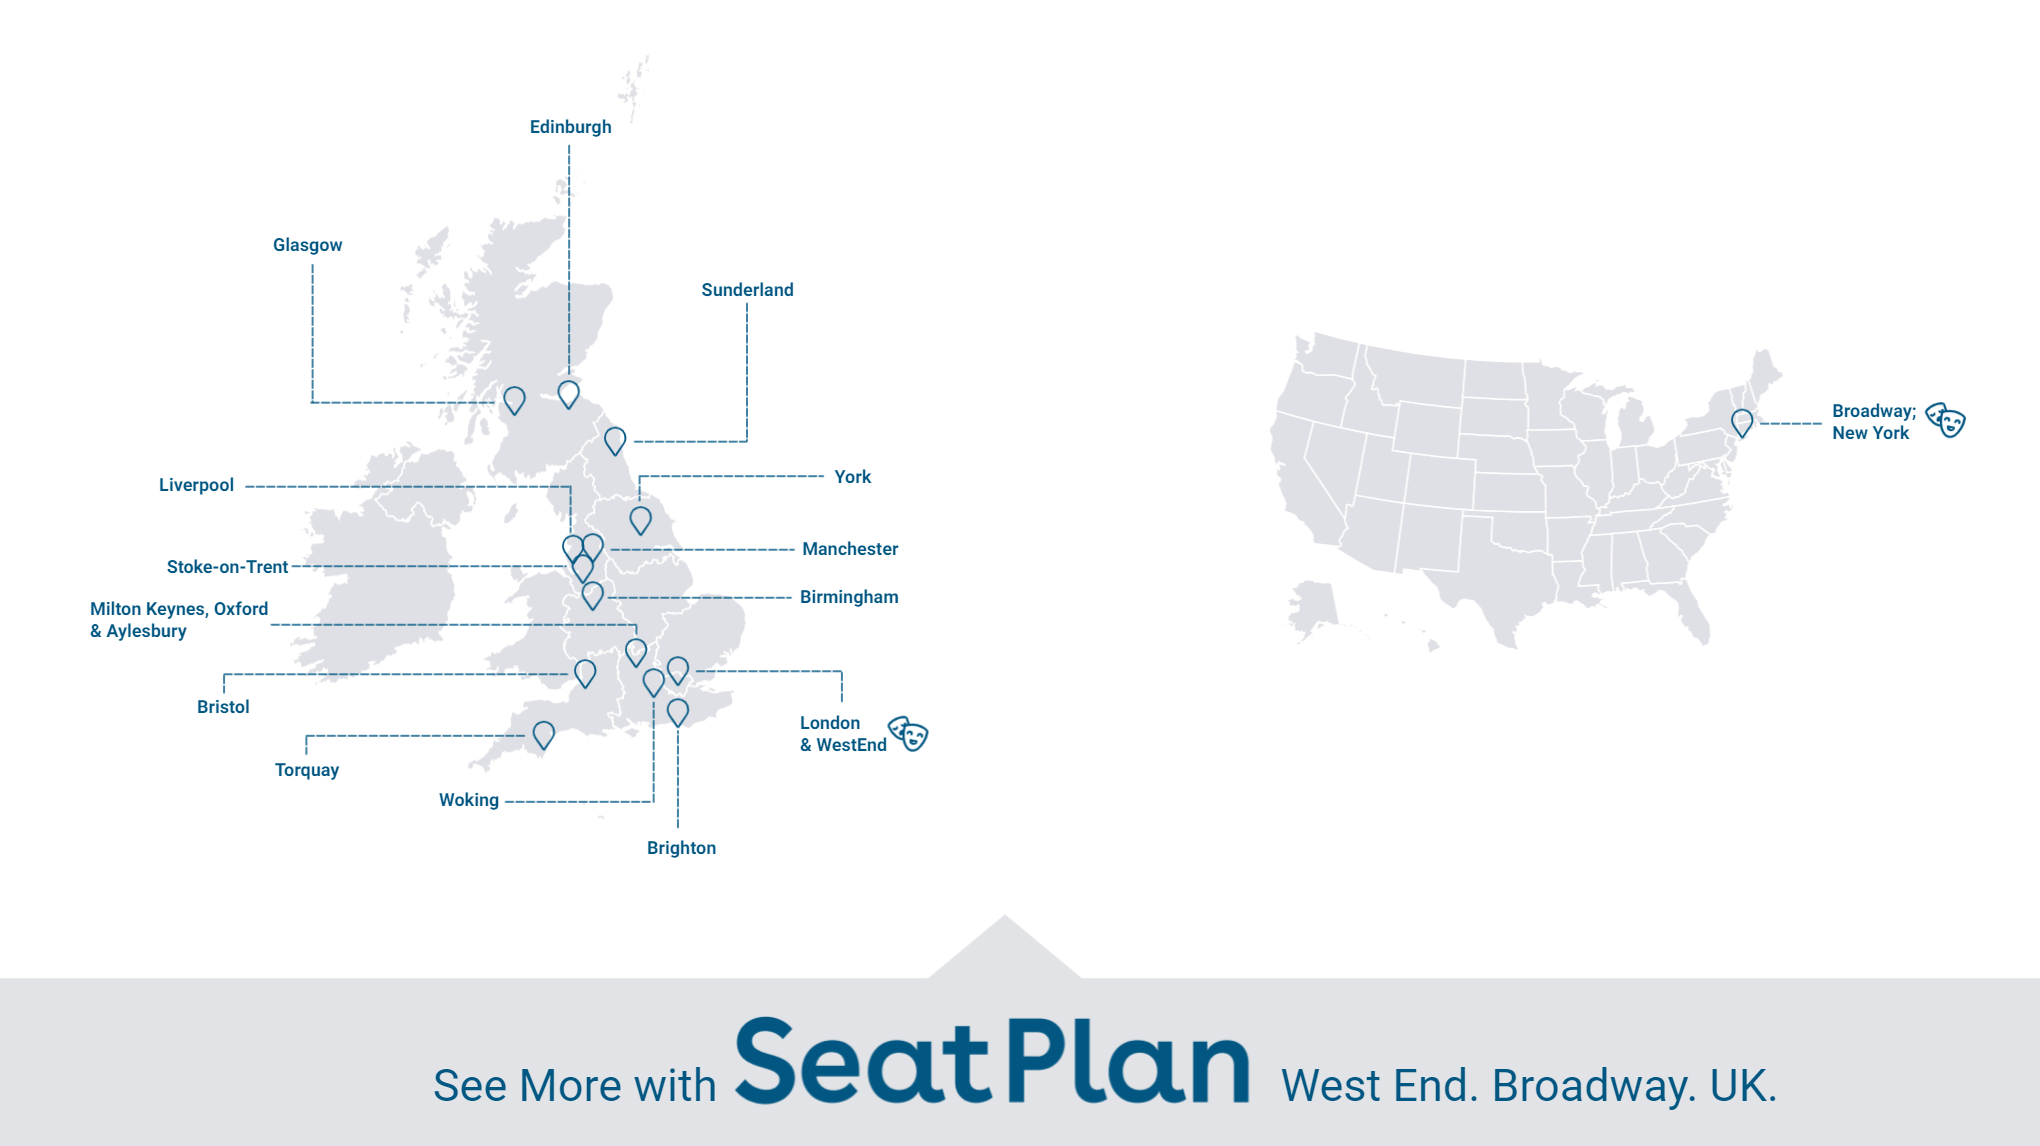 map showing locations and venues that SeatPlan covers, including West End, Broadway and major UK cities